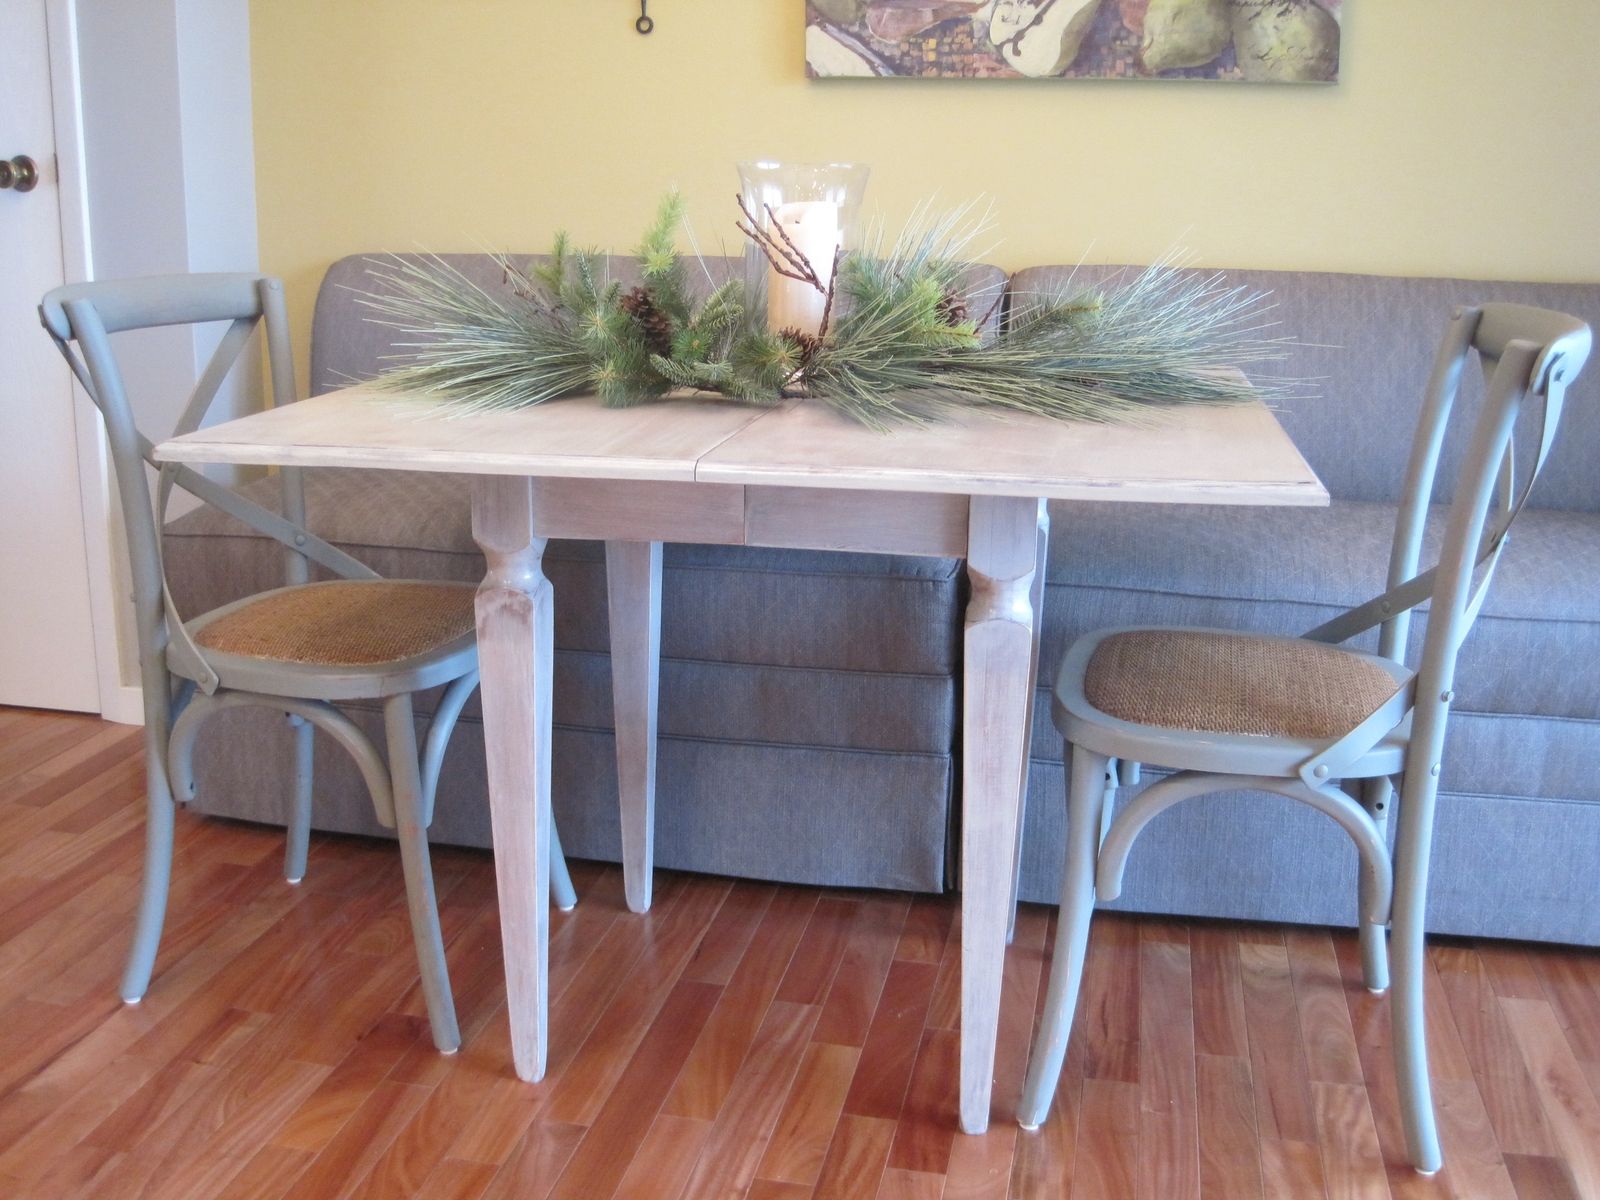 36 x 36 inch kitchen table